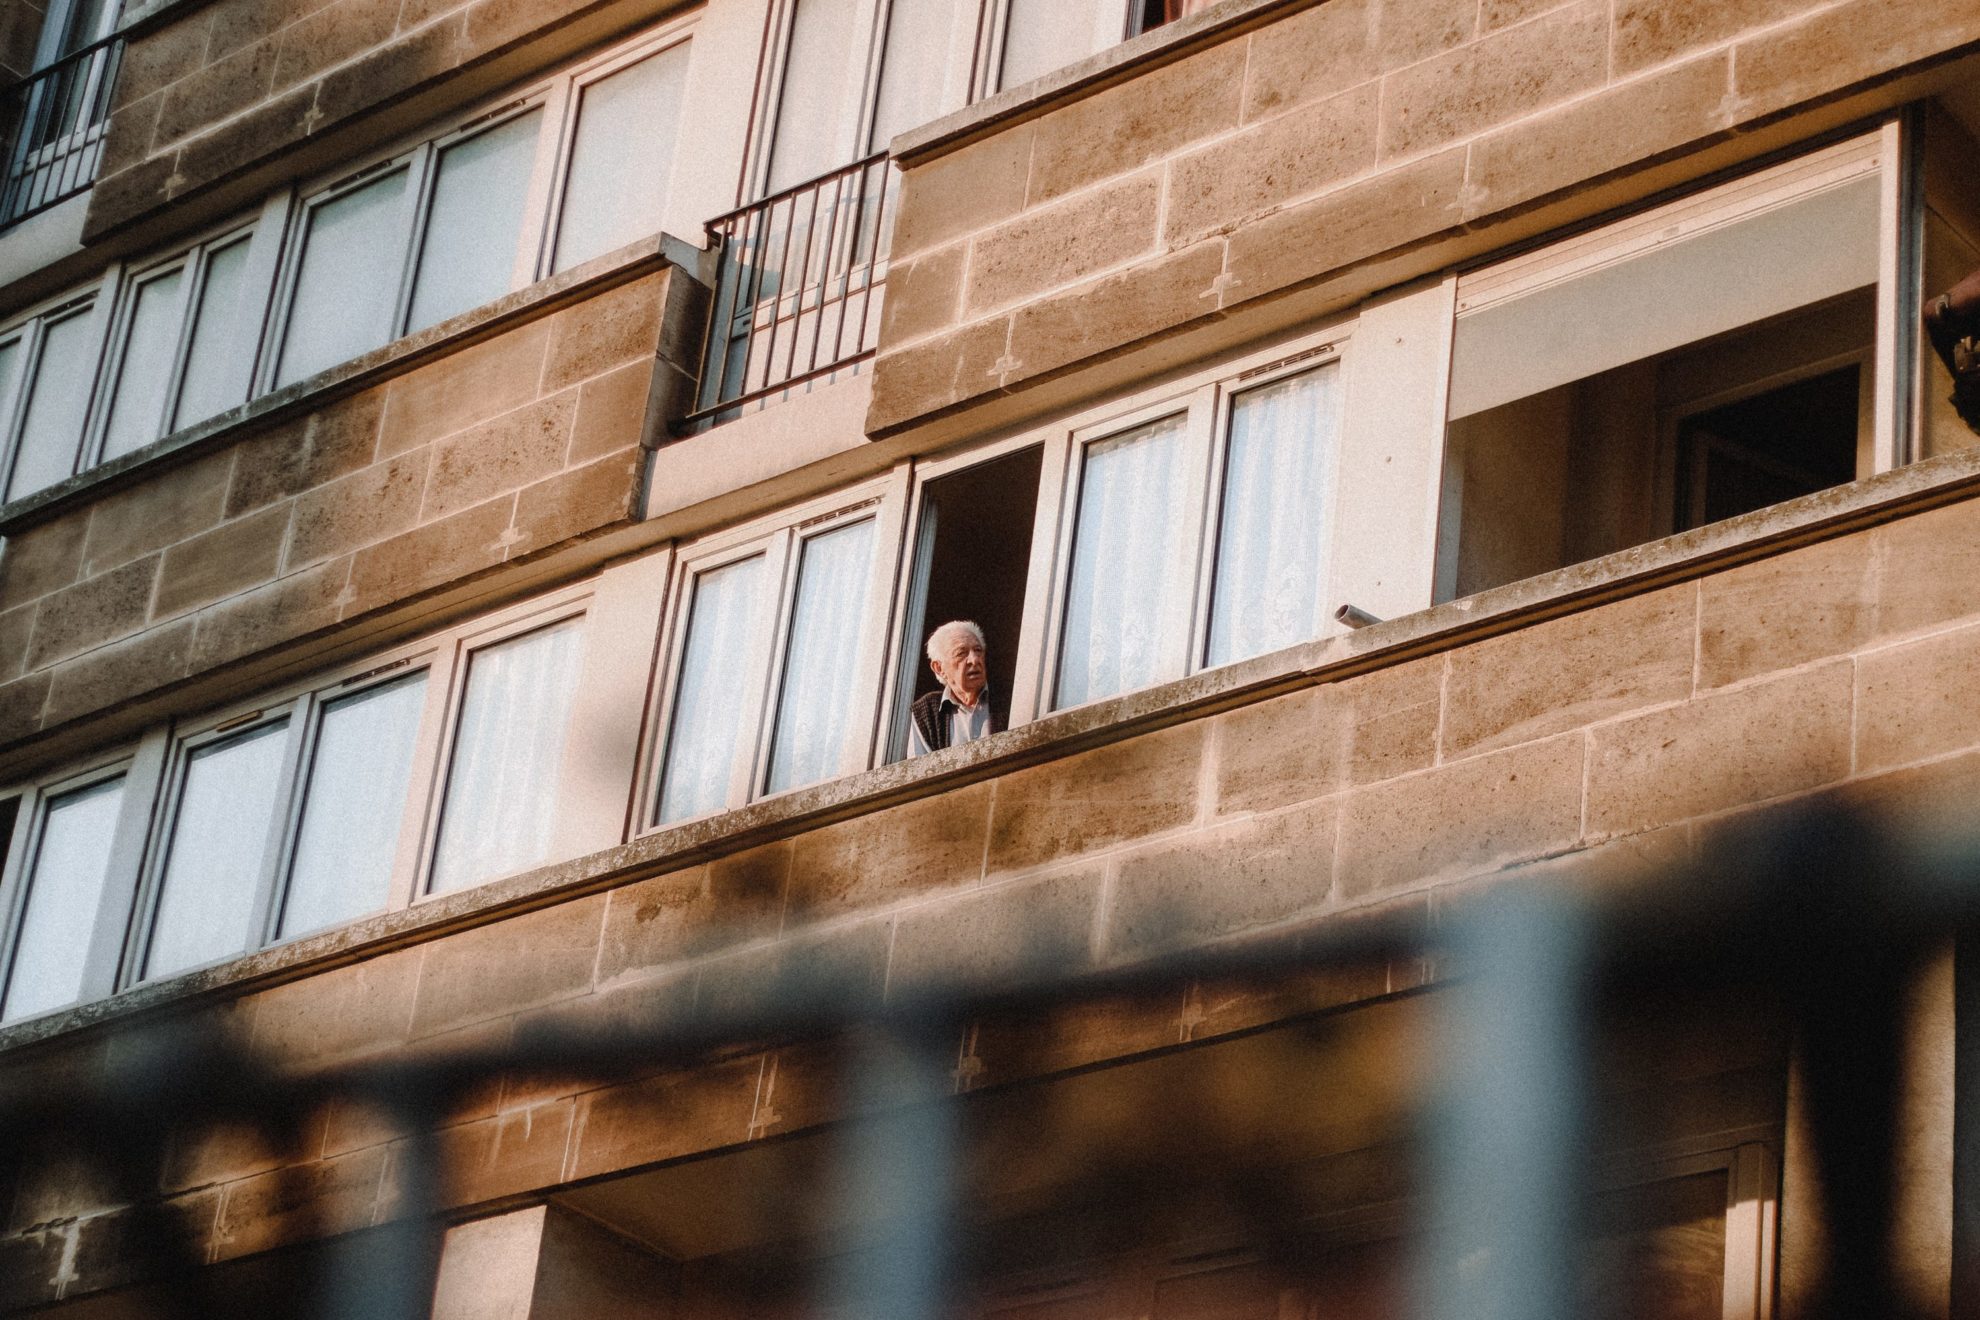 An older man looking out the window in Paris, France